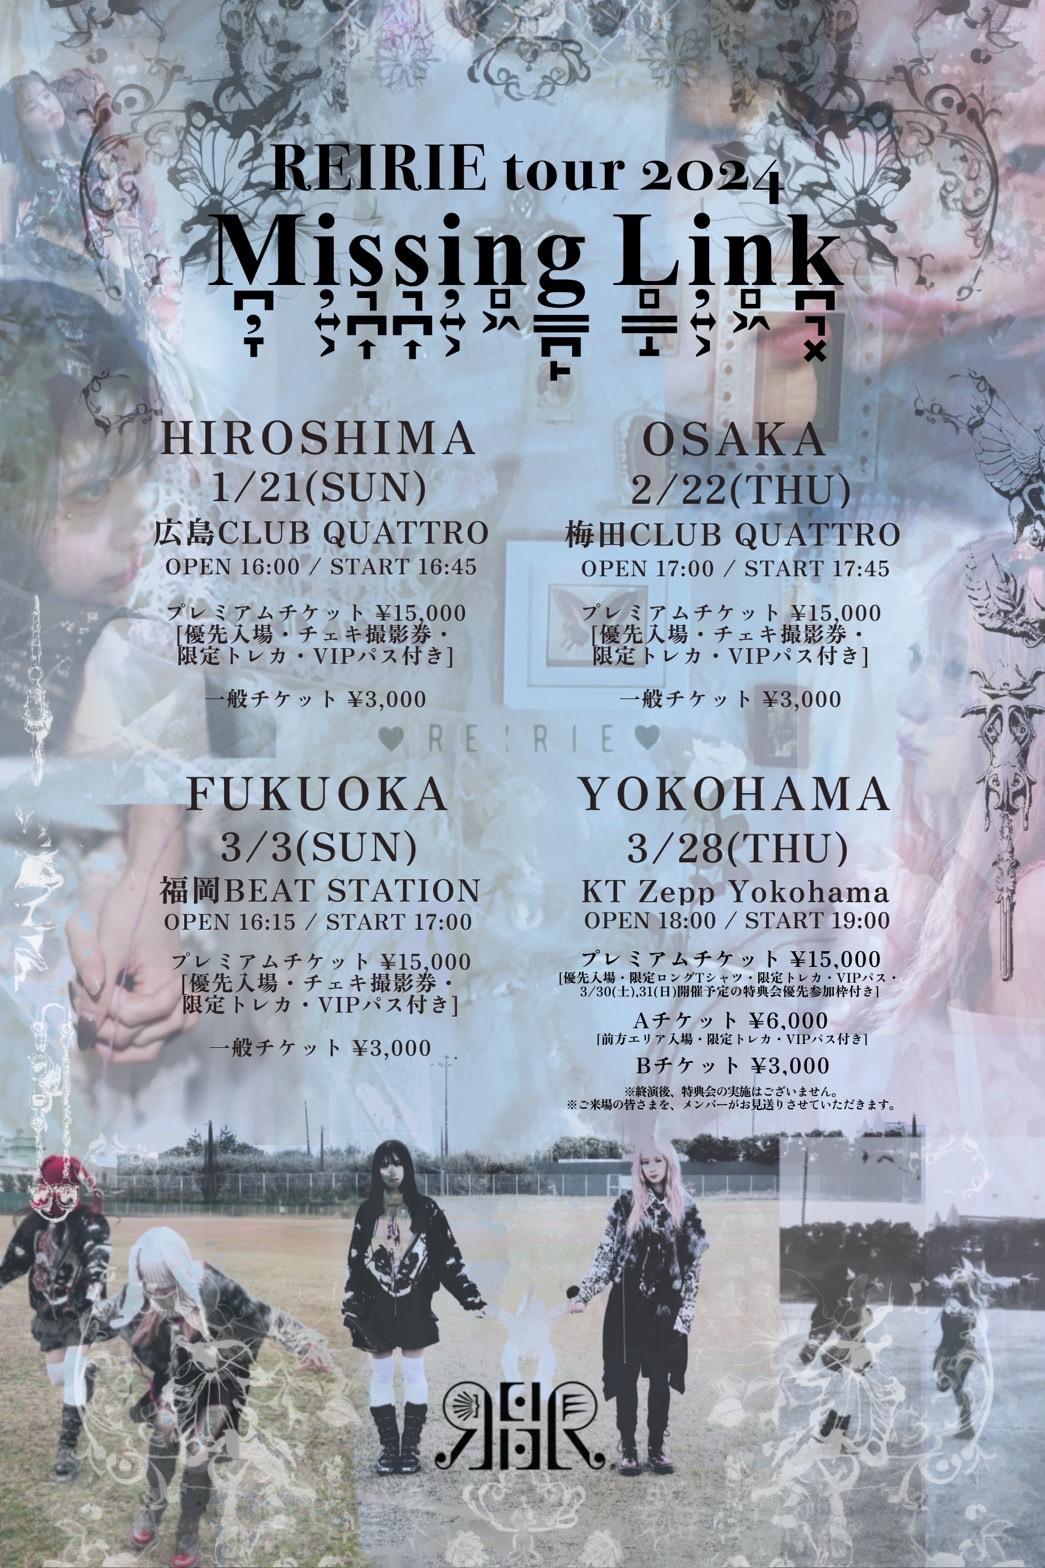 REIRIE tour 2024「Missing Link」day3&day4 チケット一般発売のご案内